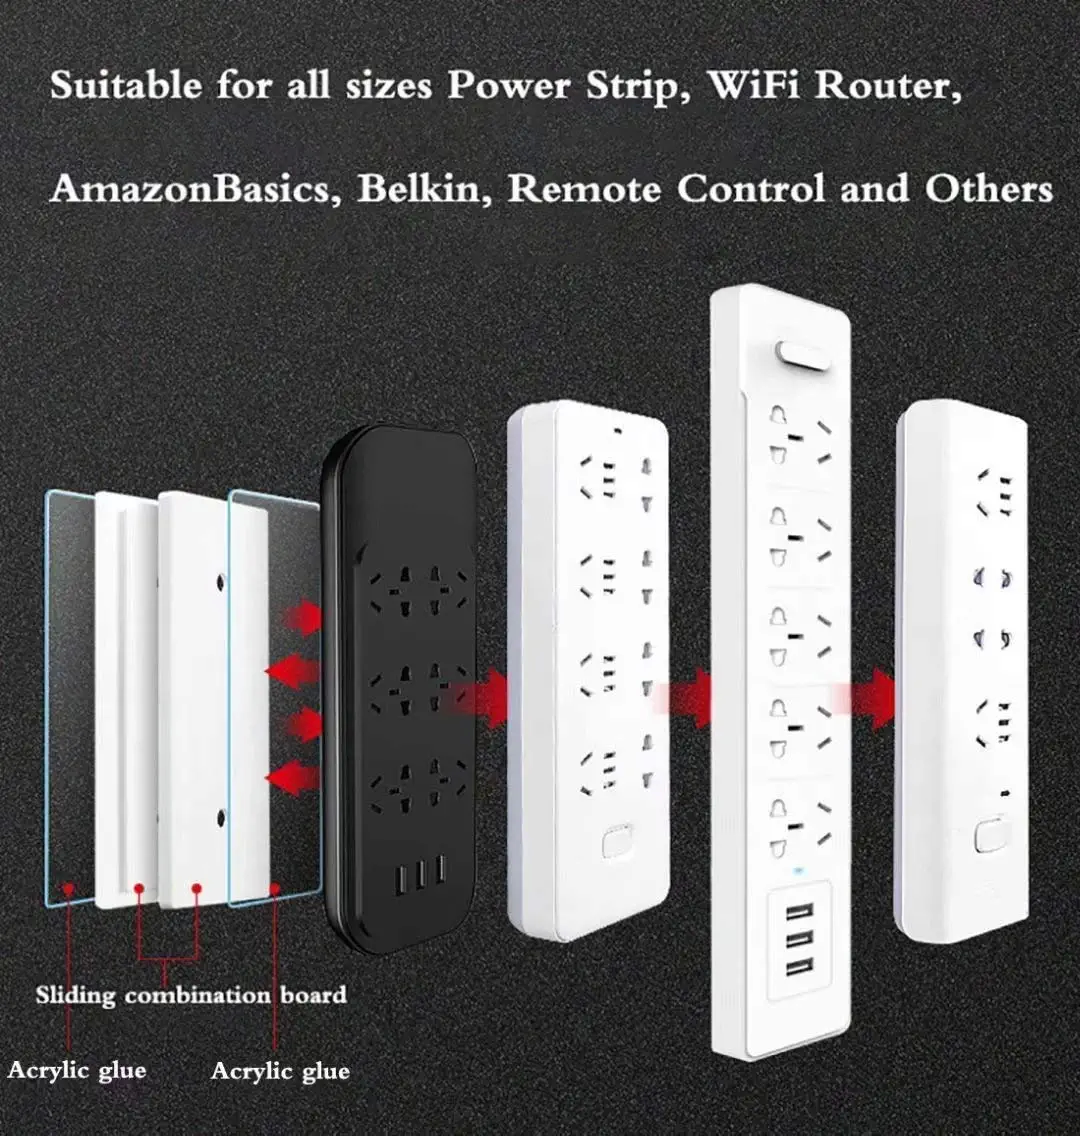 Internal-Power-Cables-Self-Adhesive-Power-Strip-Wall-Mount-Fixator-Power-Strip-Desk-Wall-Mount-Hmount-Simplest-Bracket-Stand-for-Power-Strip-WiFi-Router-Remote-Control-29